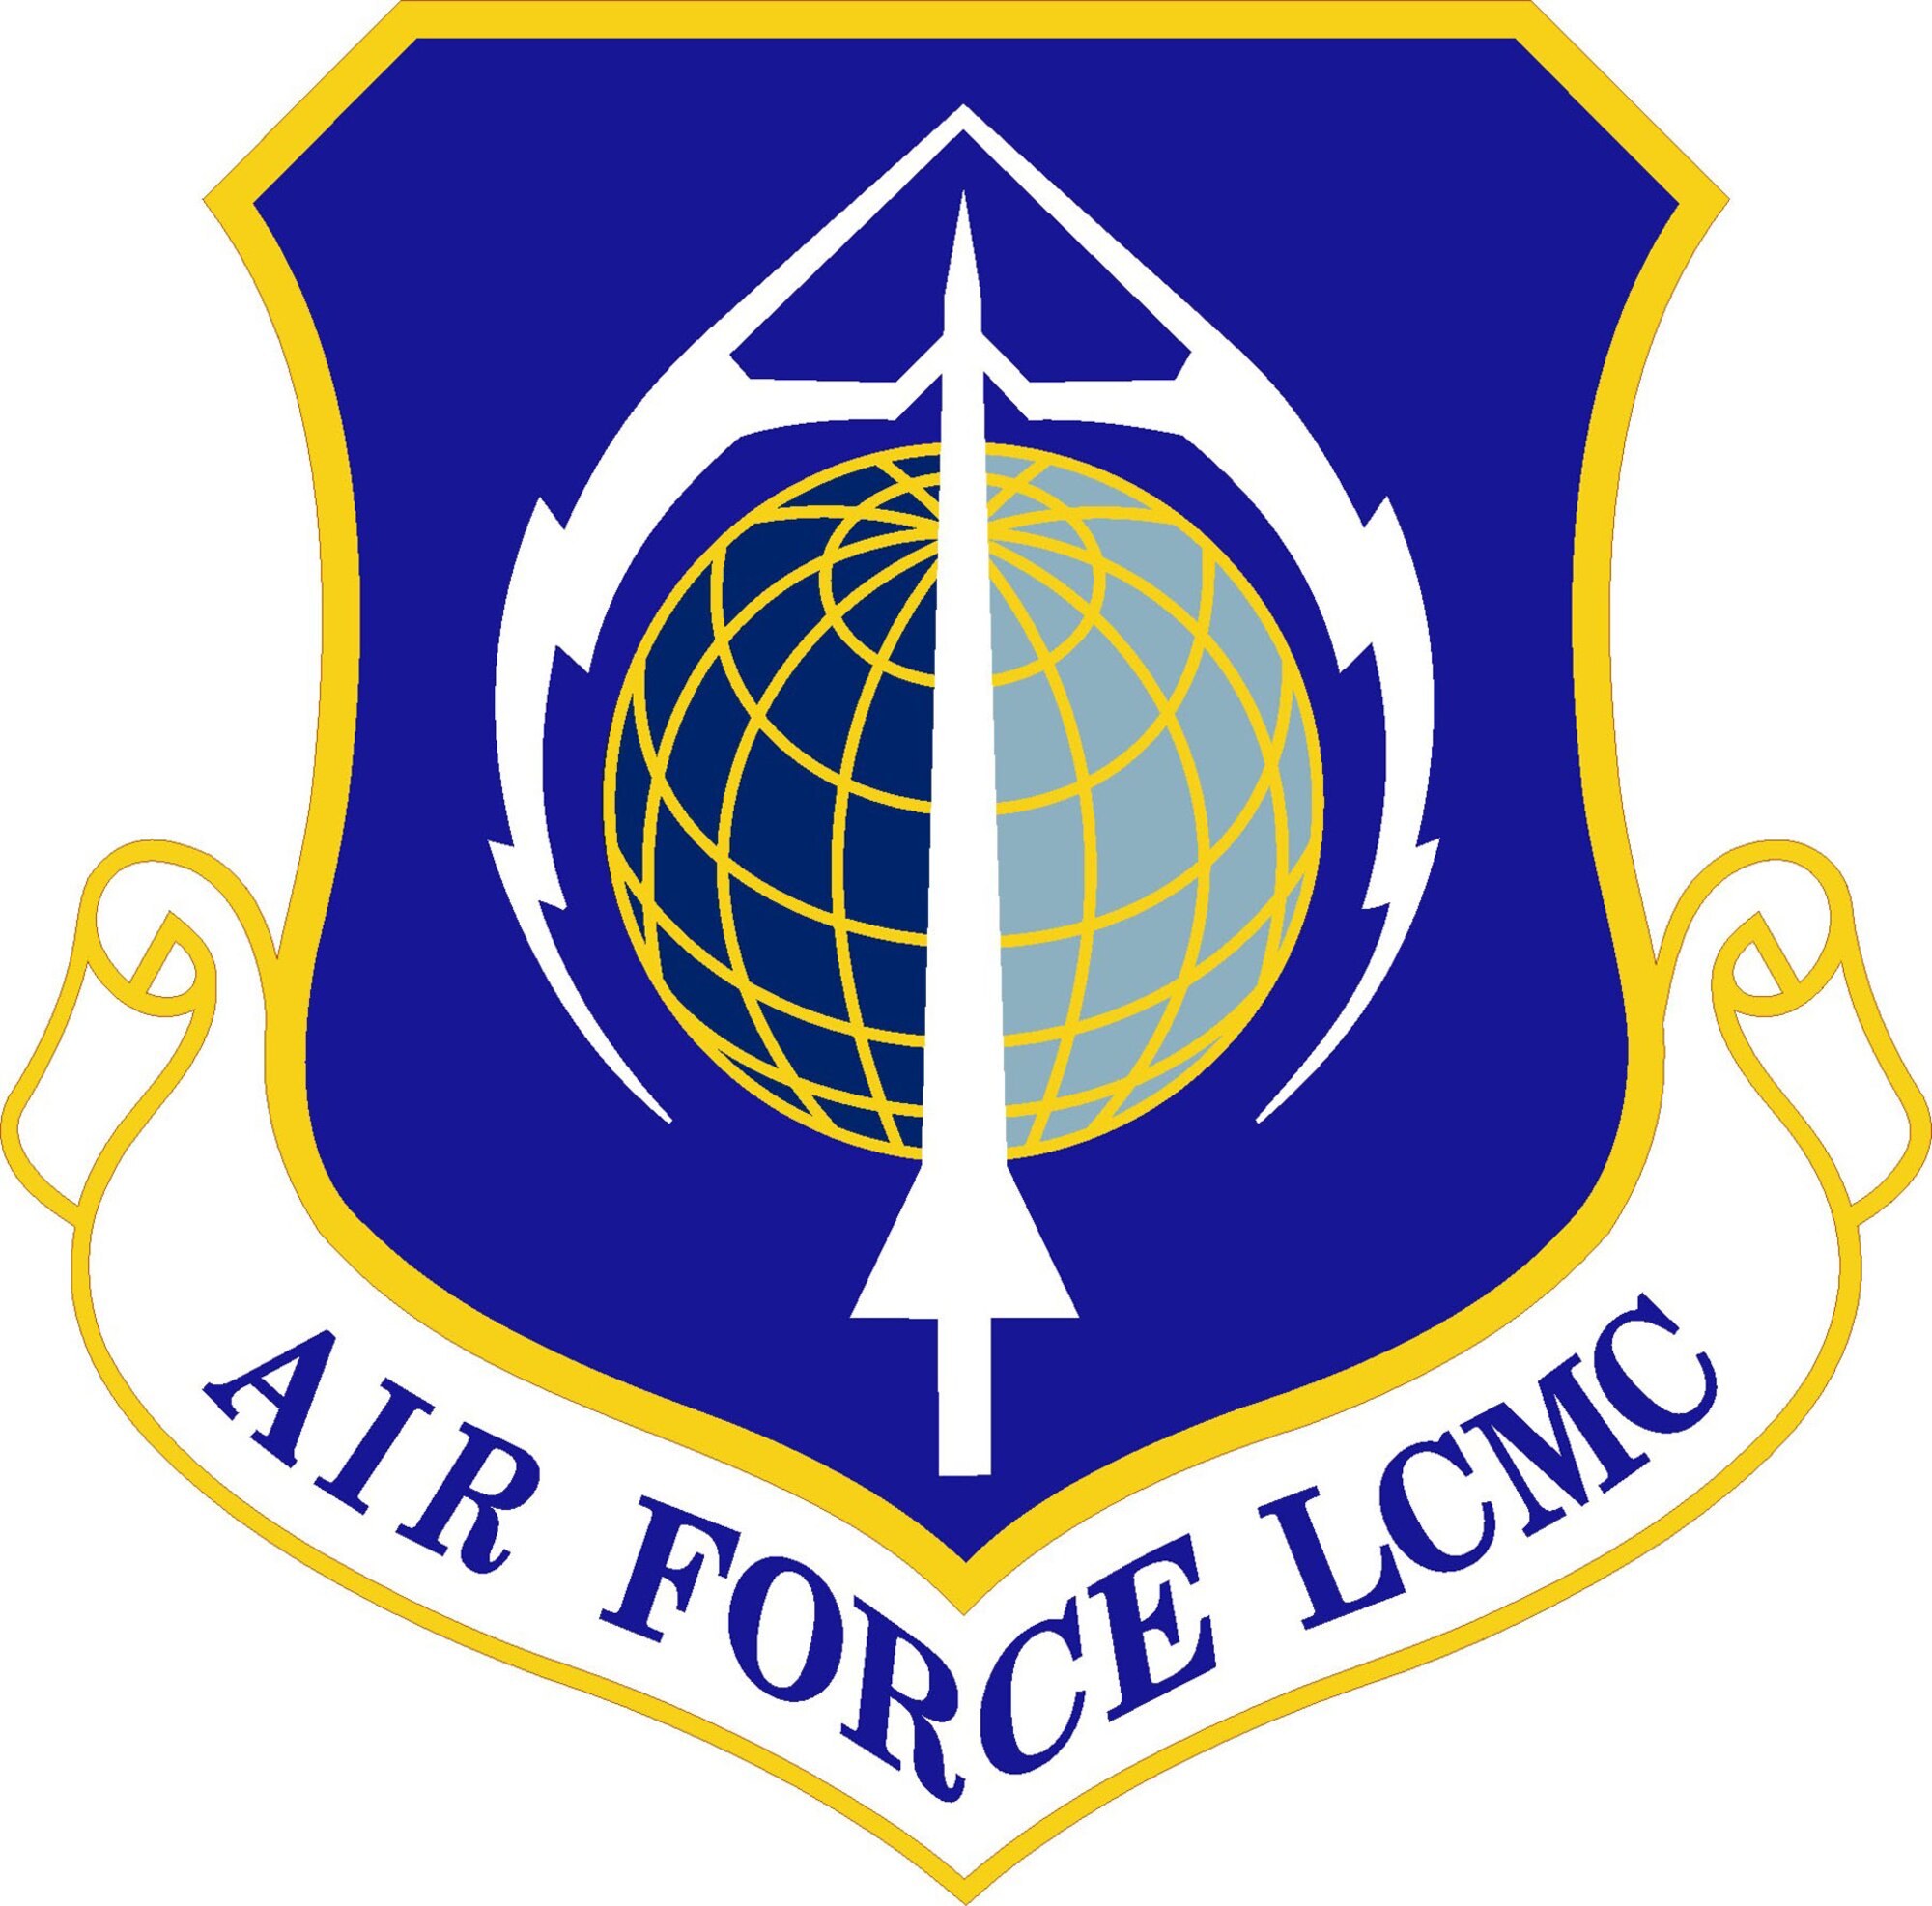 WRIGHT-PATTERSON AIR FORCE BASE, Ohio -- The official emblem for the Air Force Life Cycle Management Center has been approved by the Air Force Historical Research Agency, marking another step in the development of the new center.  